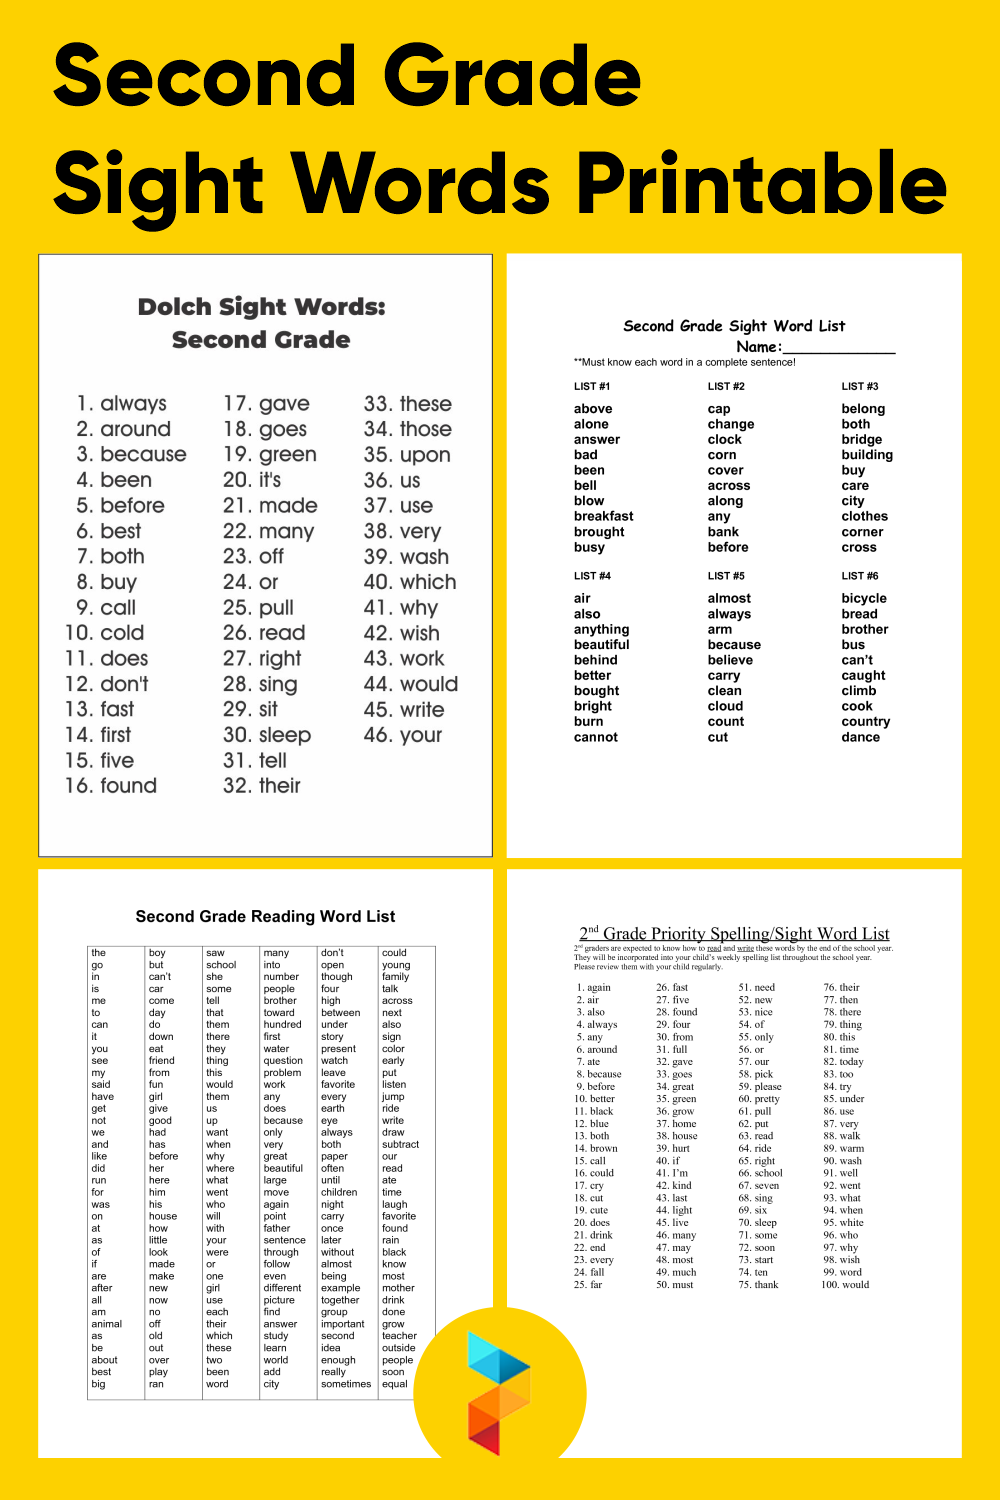 Sight Words For 2nd Grade Worksheets